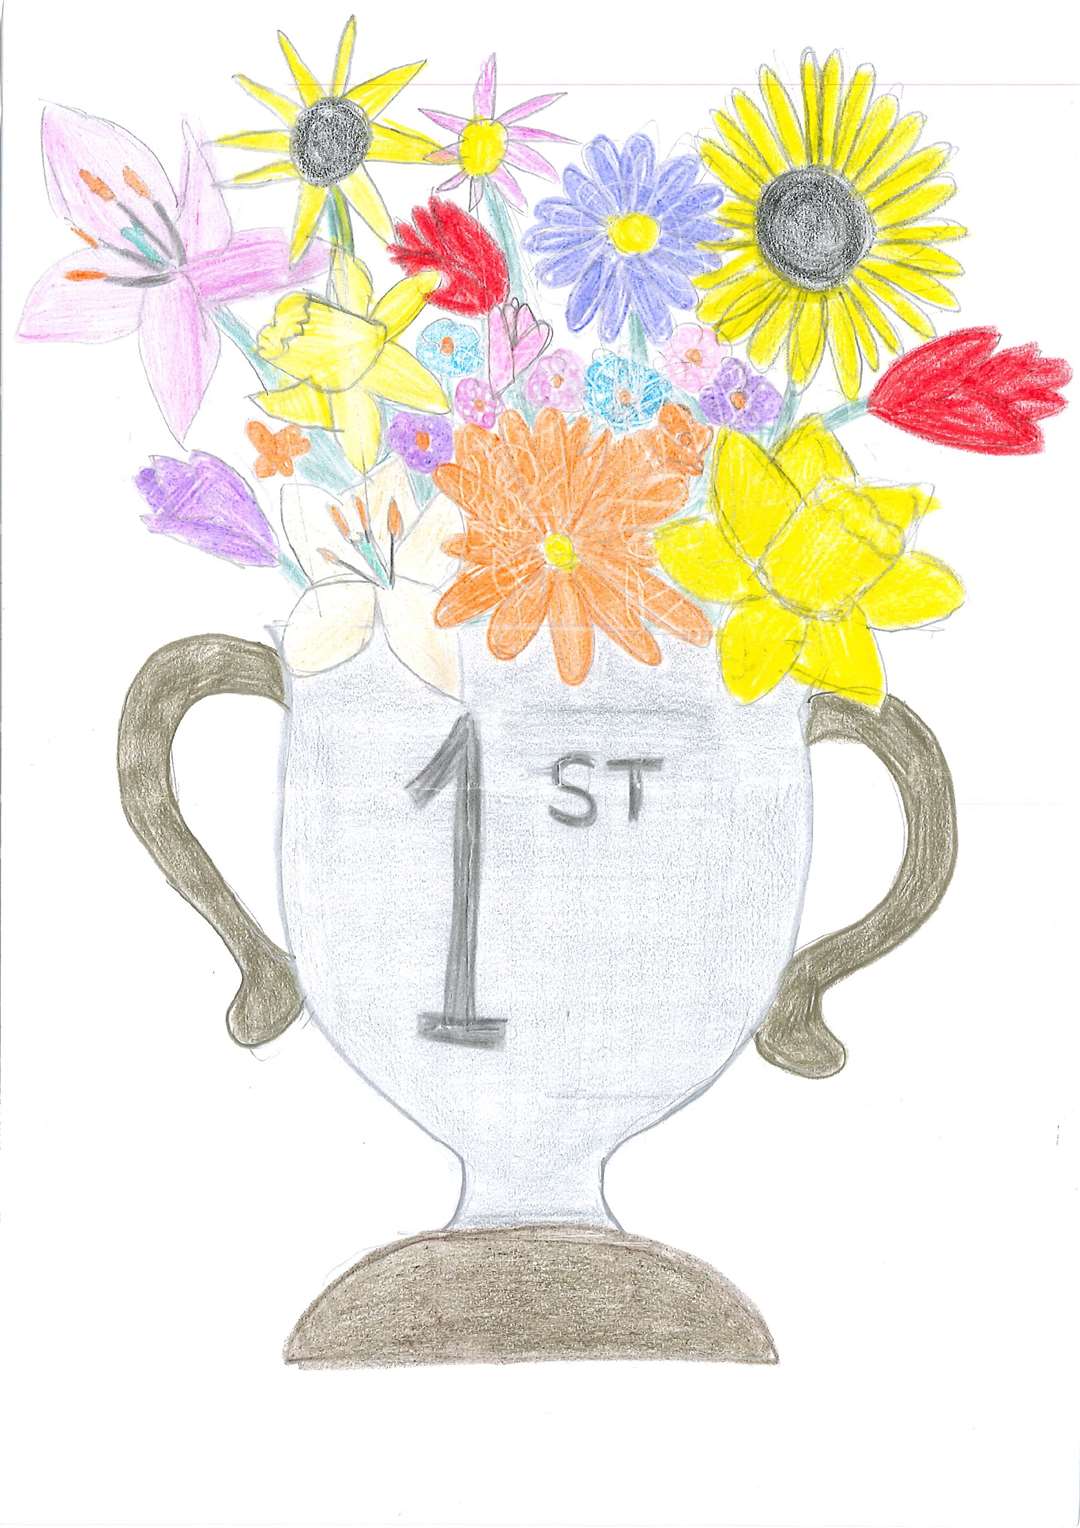 Lucia De Cicco was runner up in the Walmer in Bloom Poster Competition